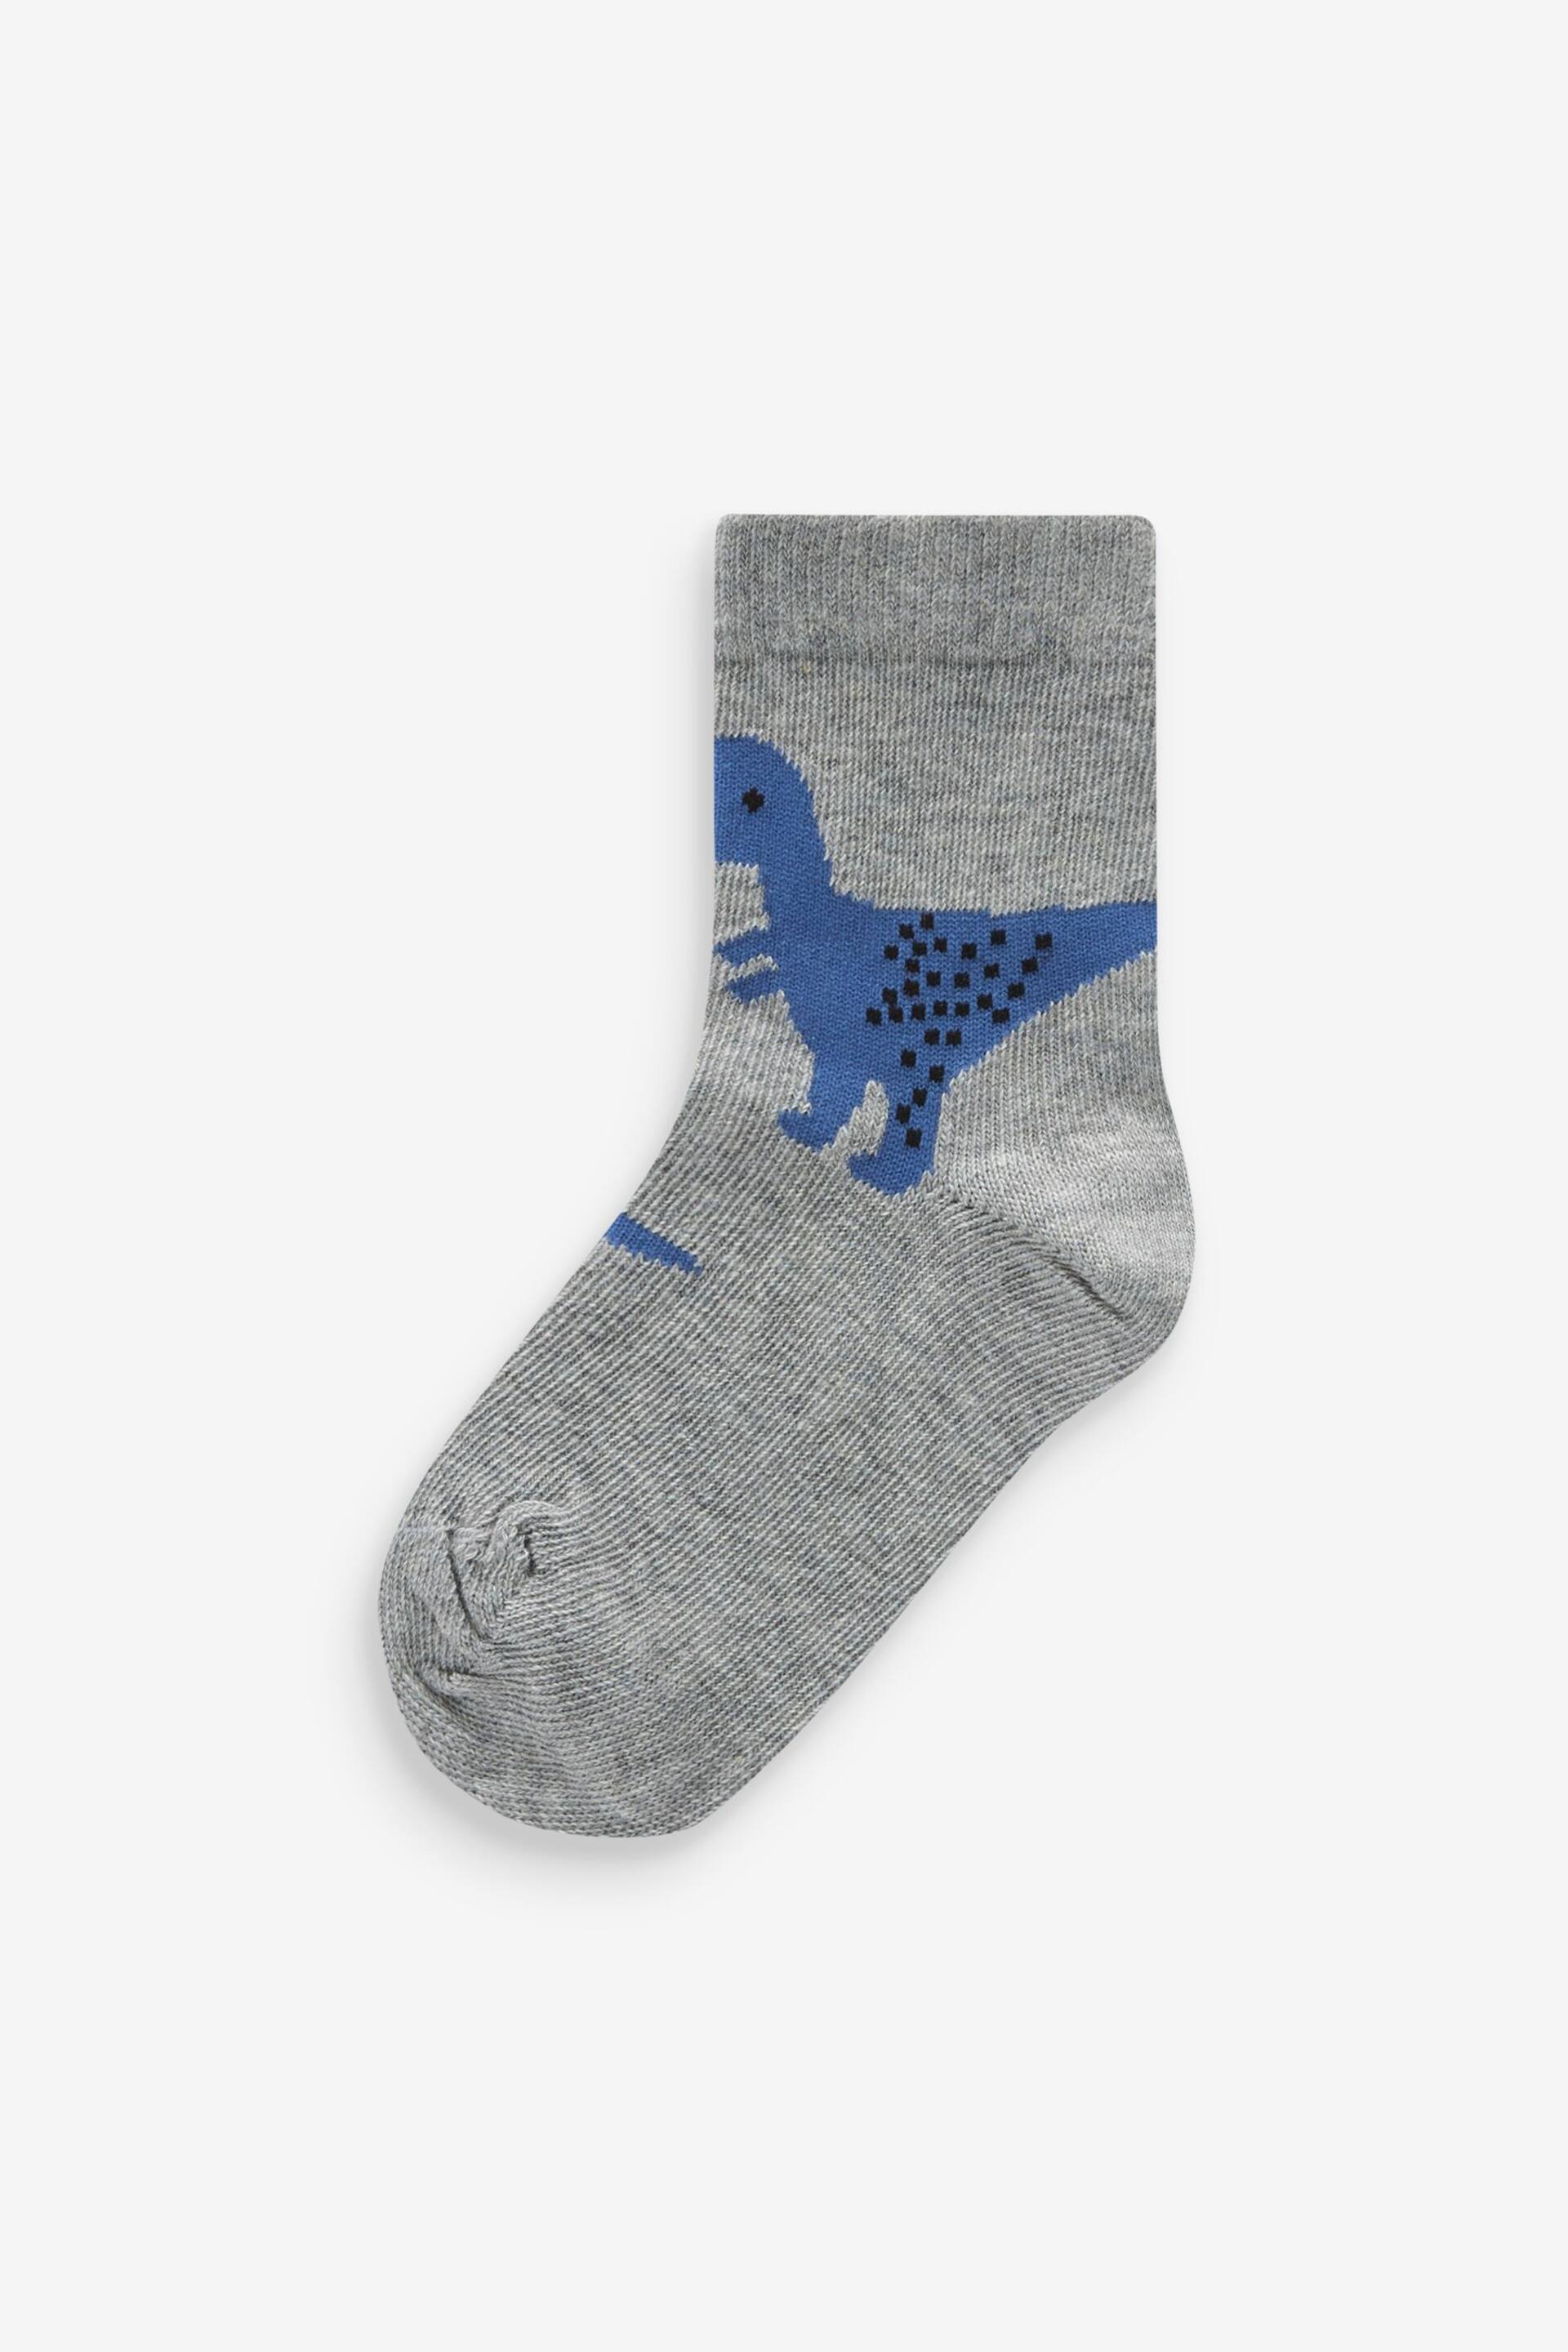 Blue Dino Cotton Rich Socks 7 Pack - Image 7 of 8